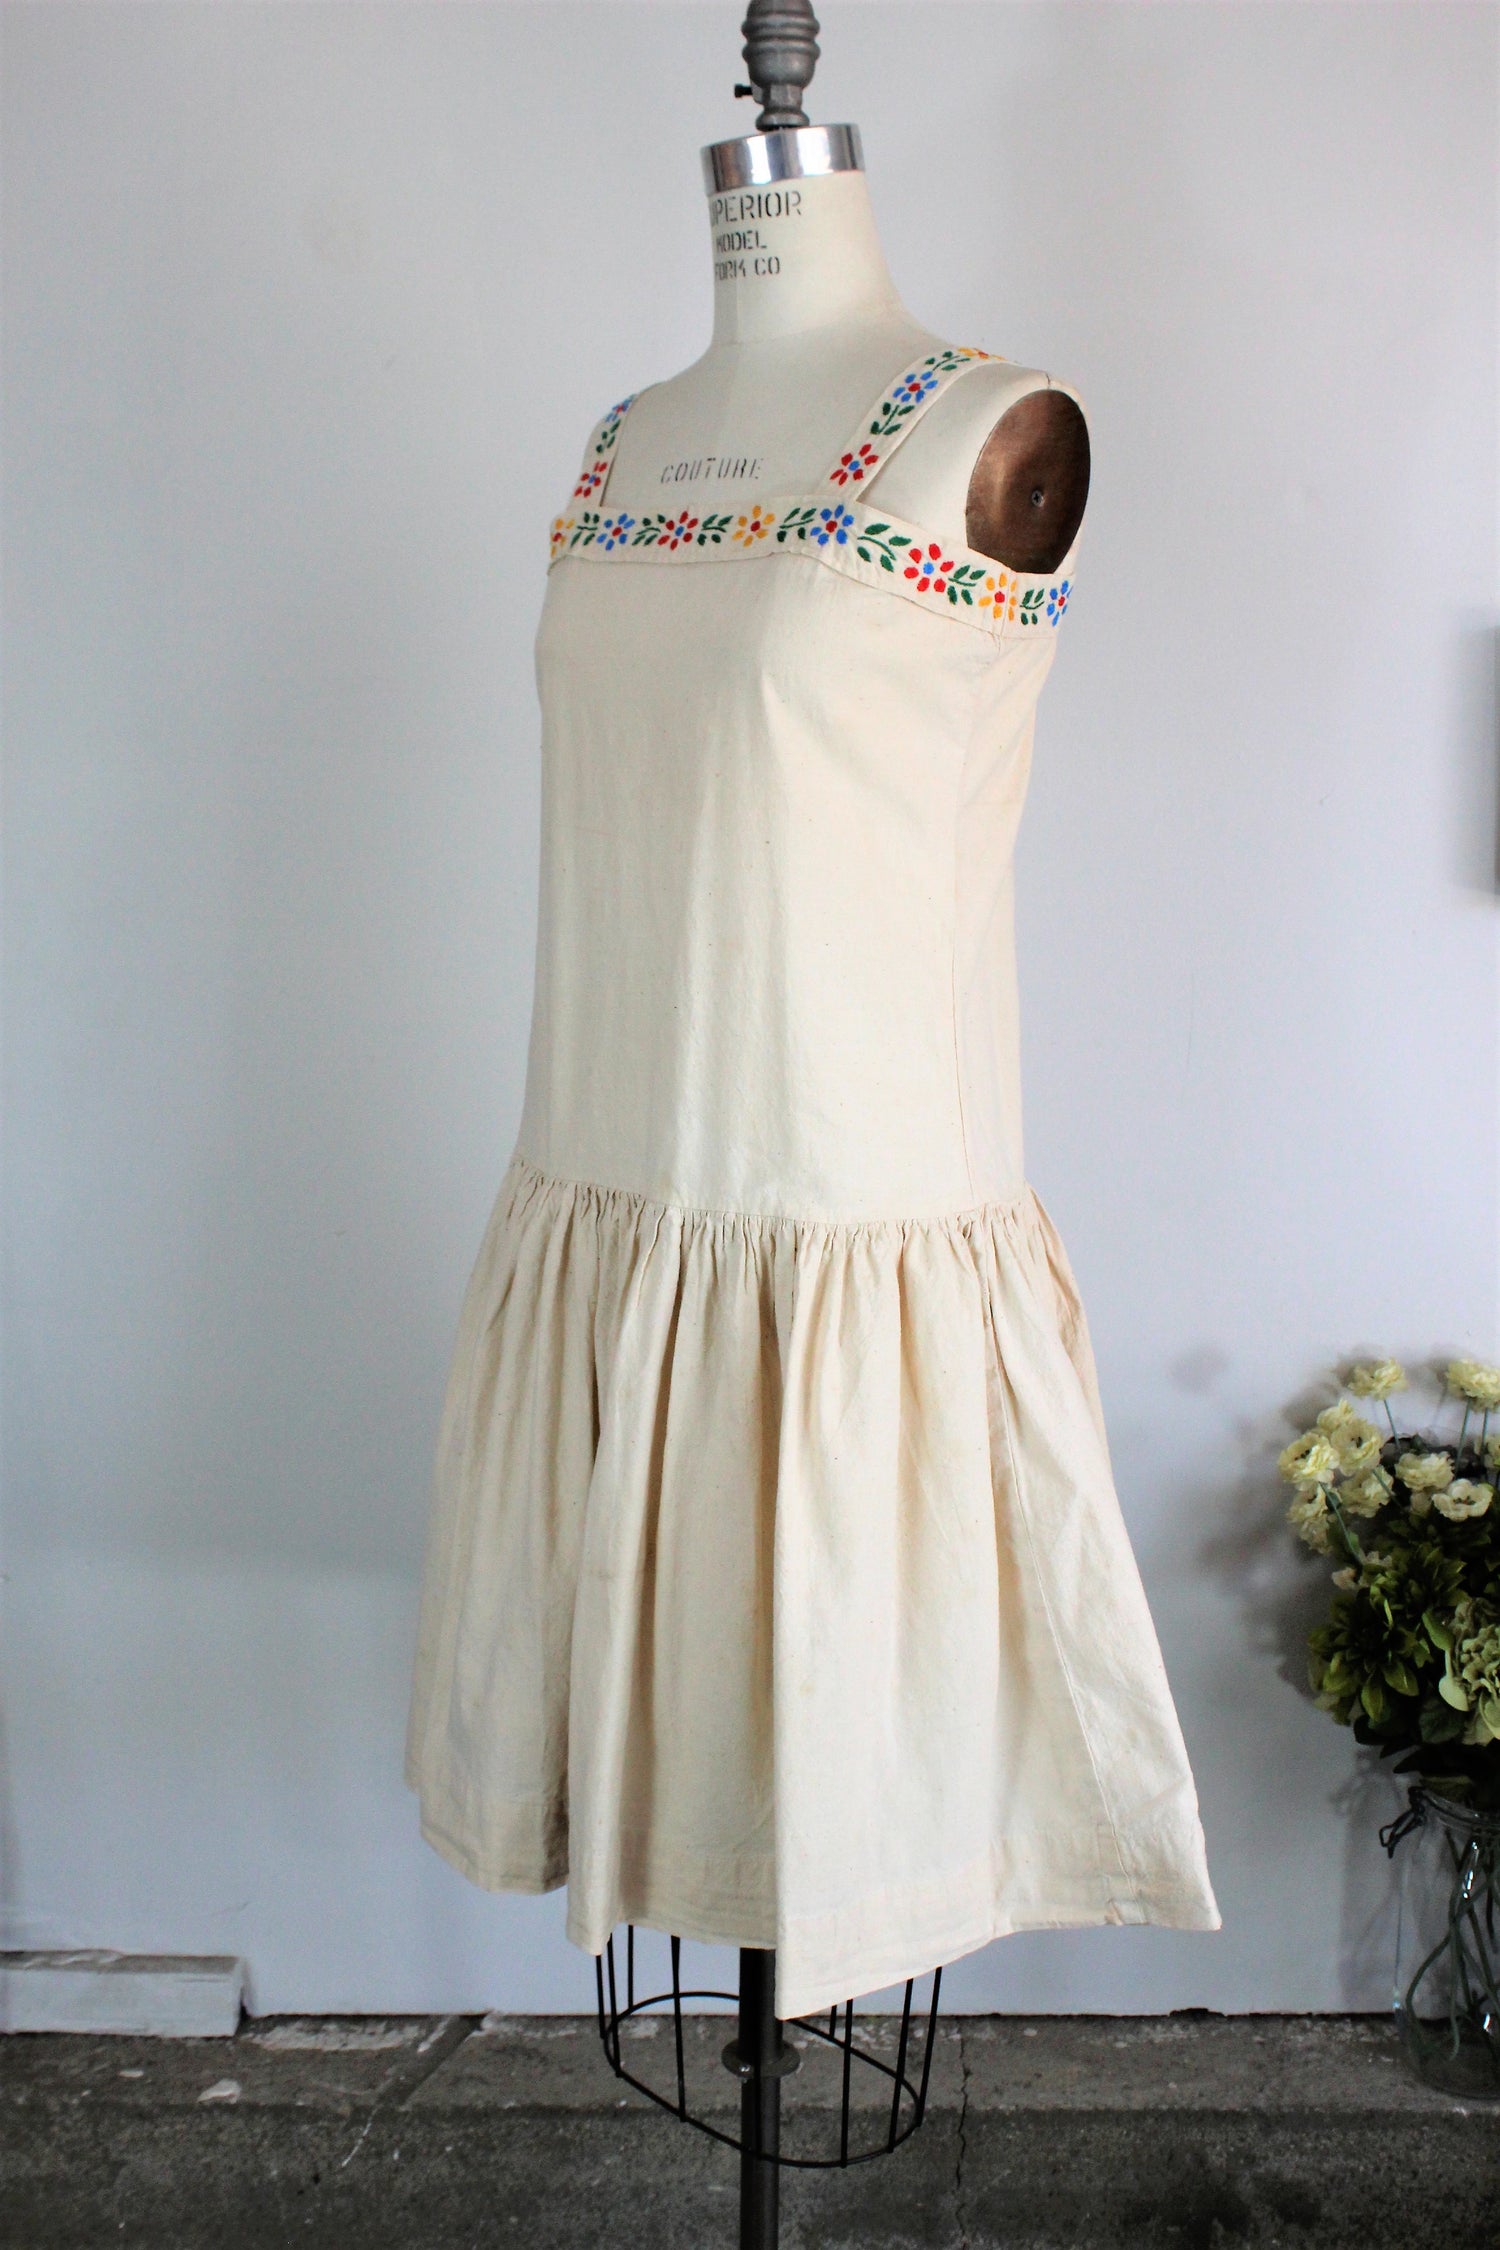 Vintage 1960s 1970s Does 1920s Dress With Embroidered Flowers